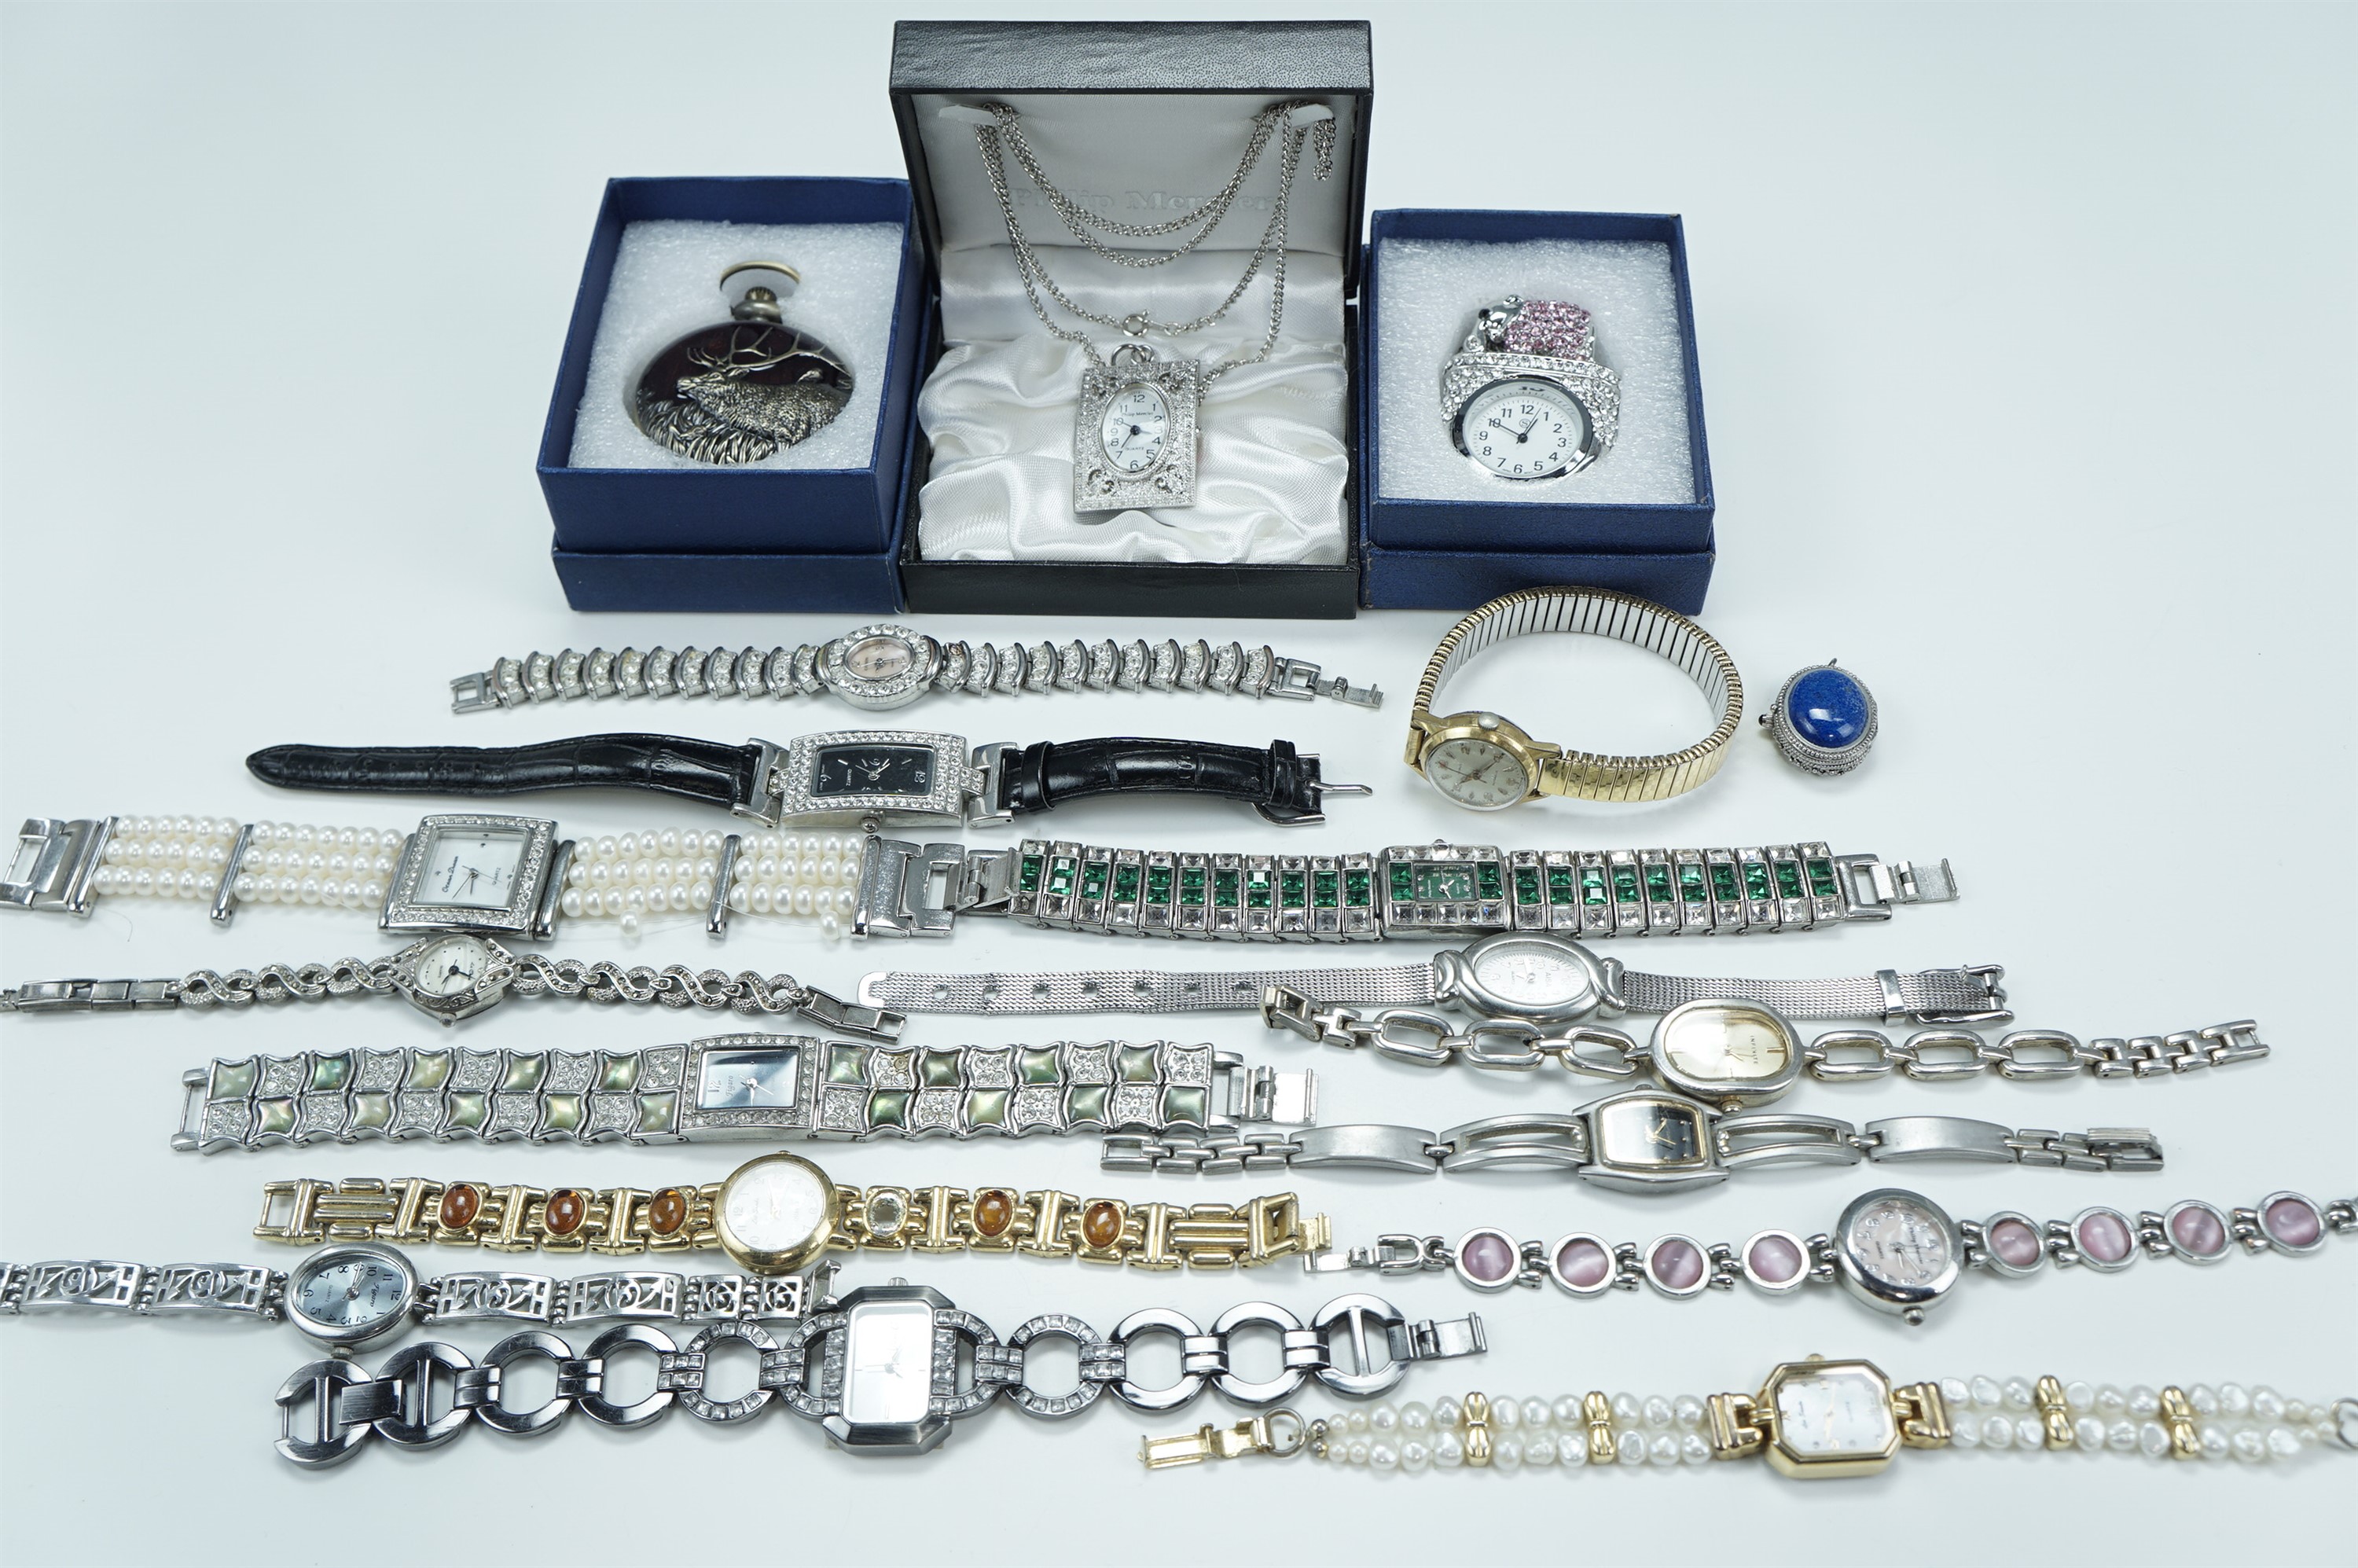 A quantity of watches, including three pendant watches and a pocket watch